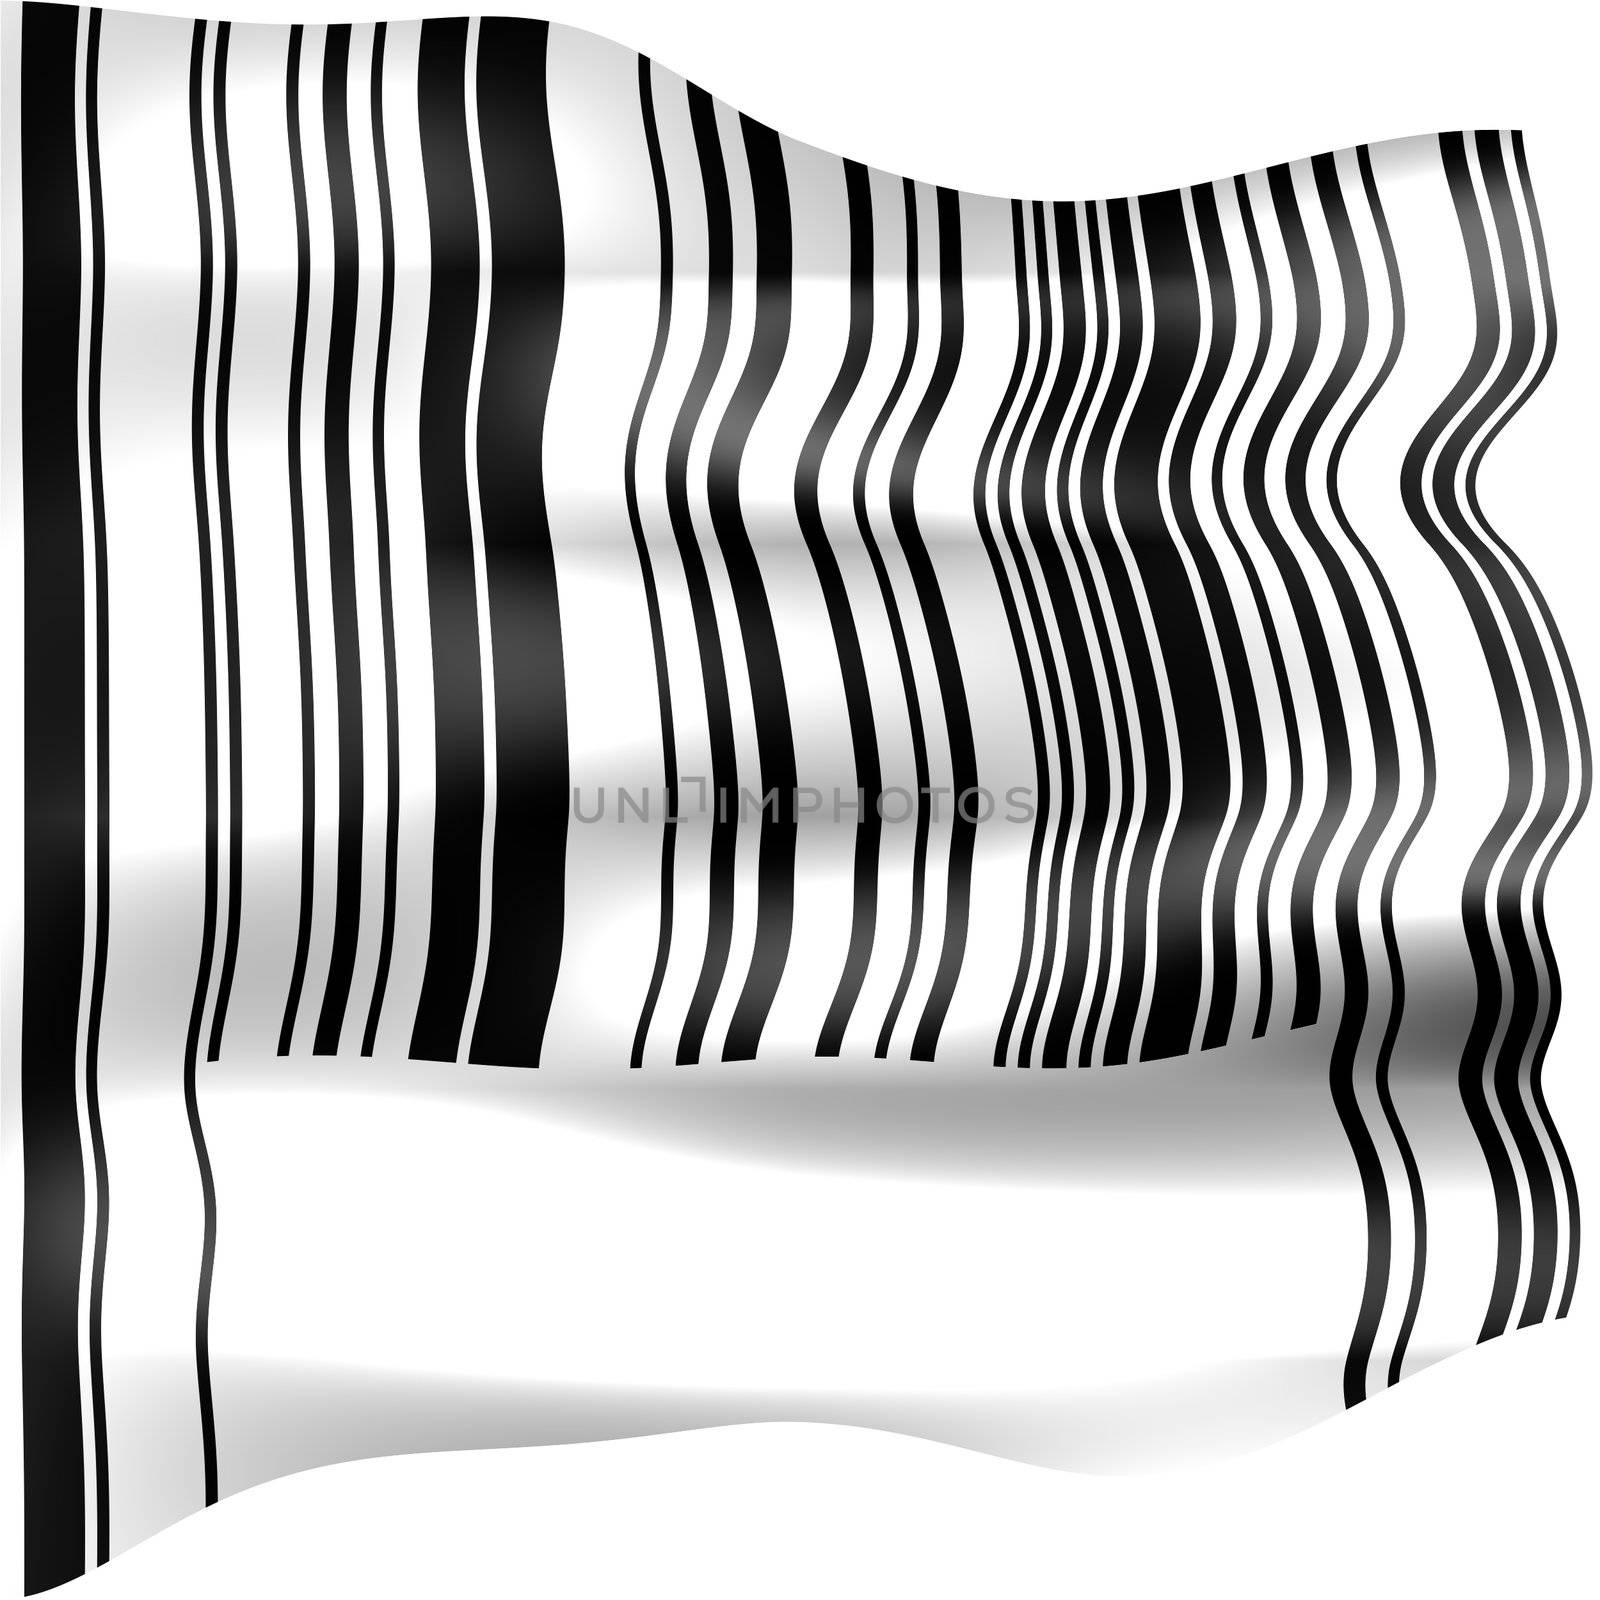 Barcode flag isolated in white